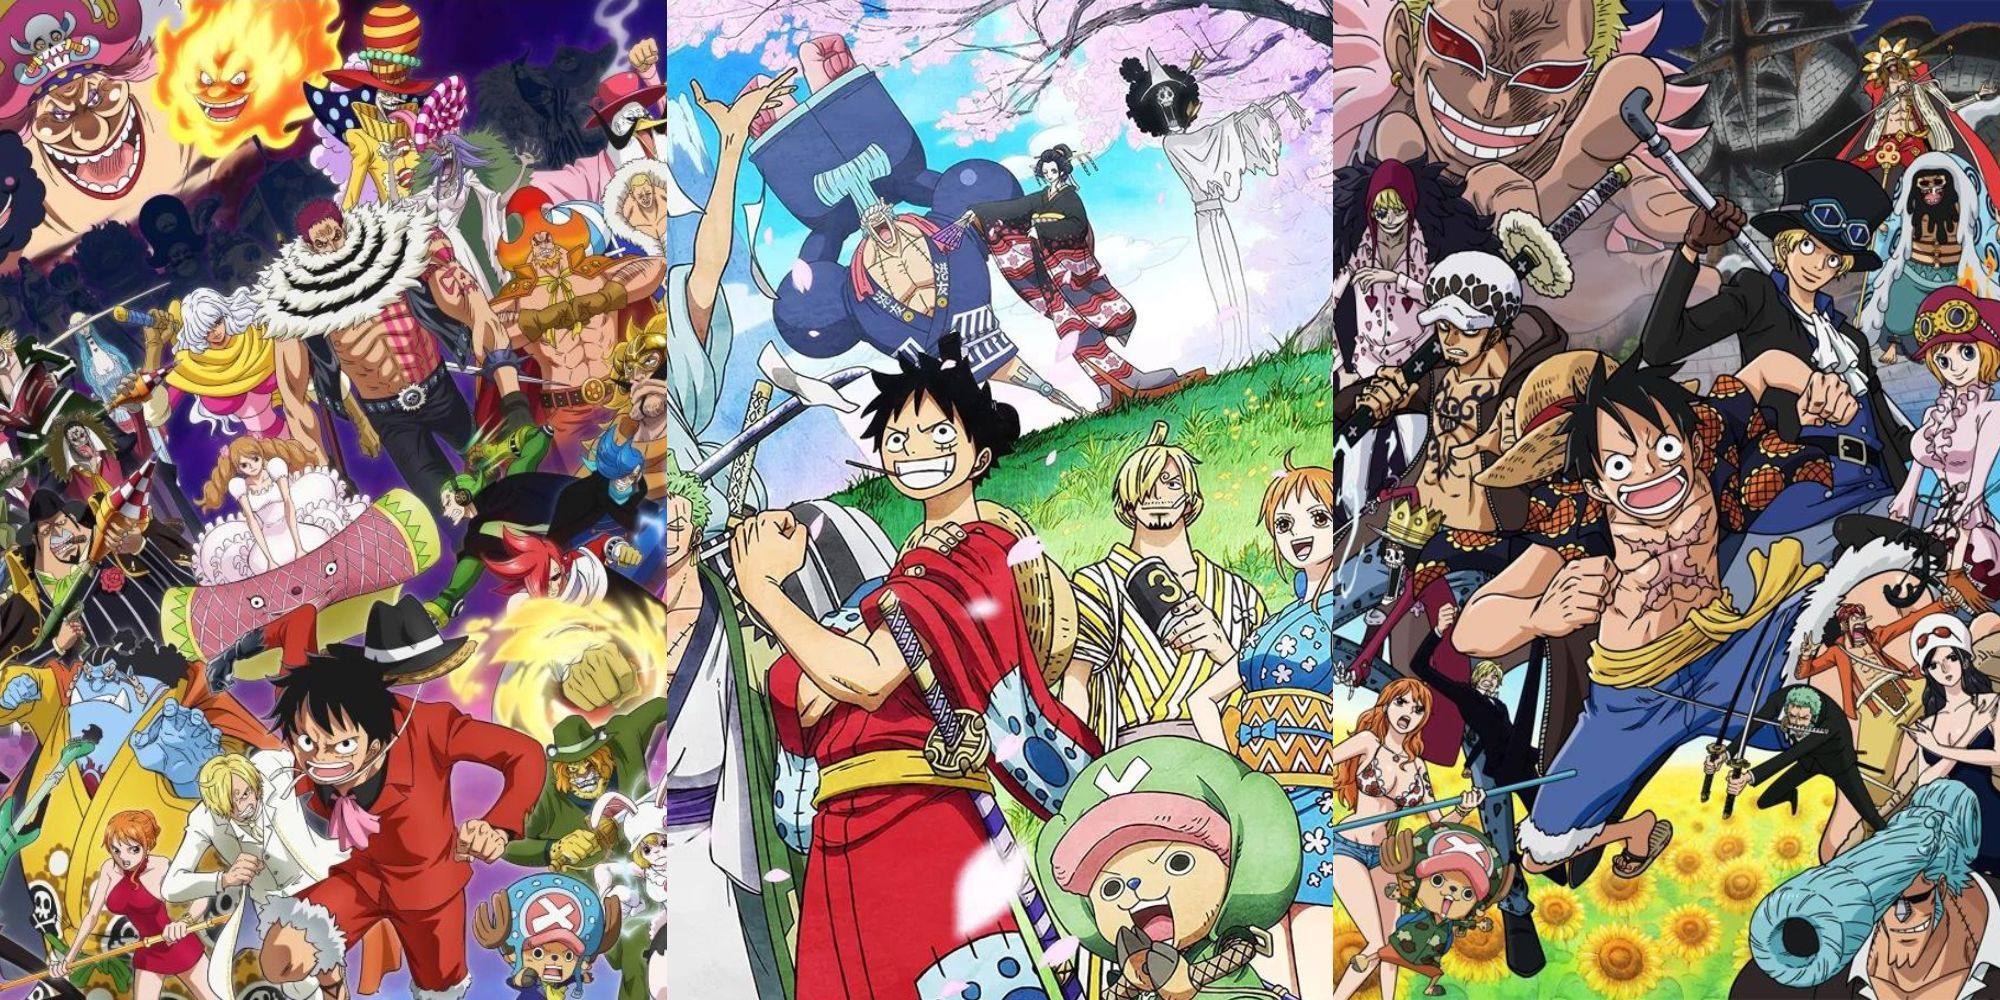 A collage of some of the longest arcs in the One Piece anime: Whole Cake Island, Wano Country and Dressrosa.